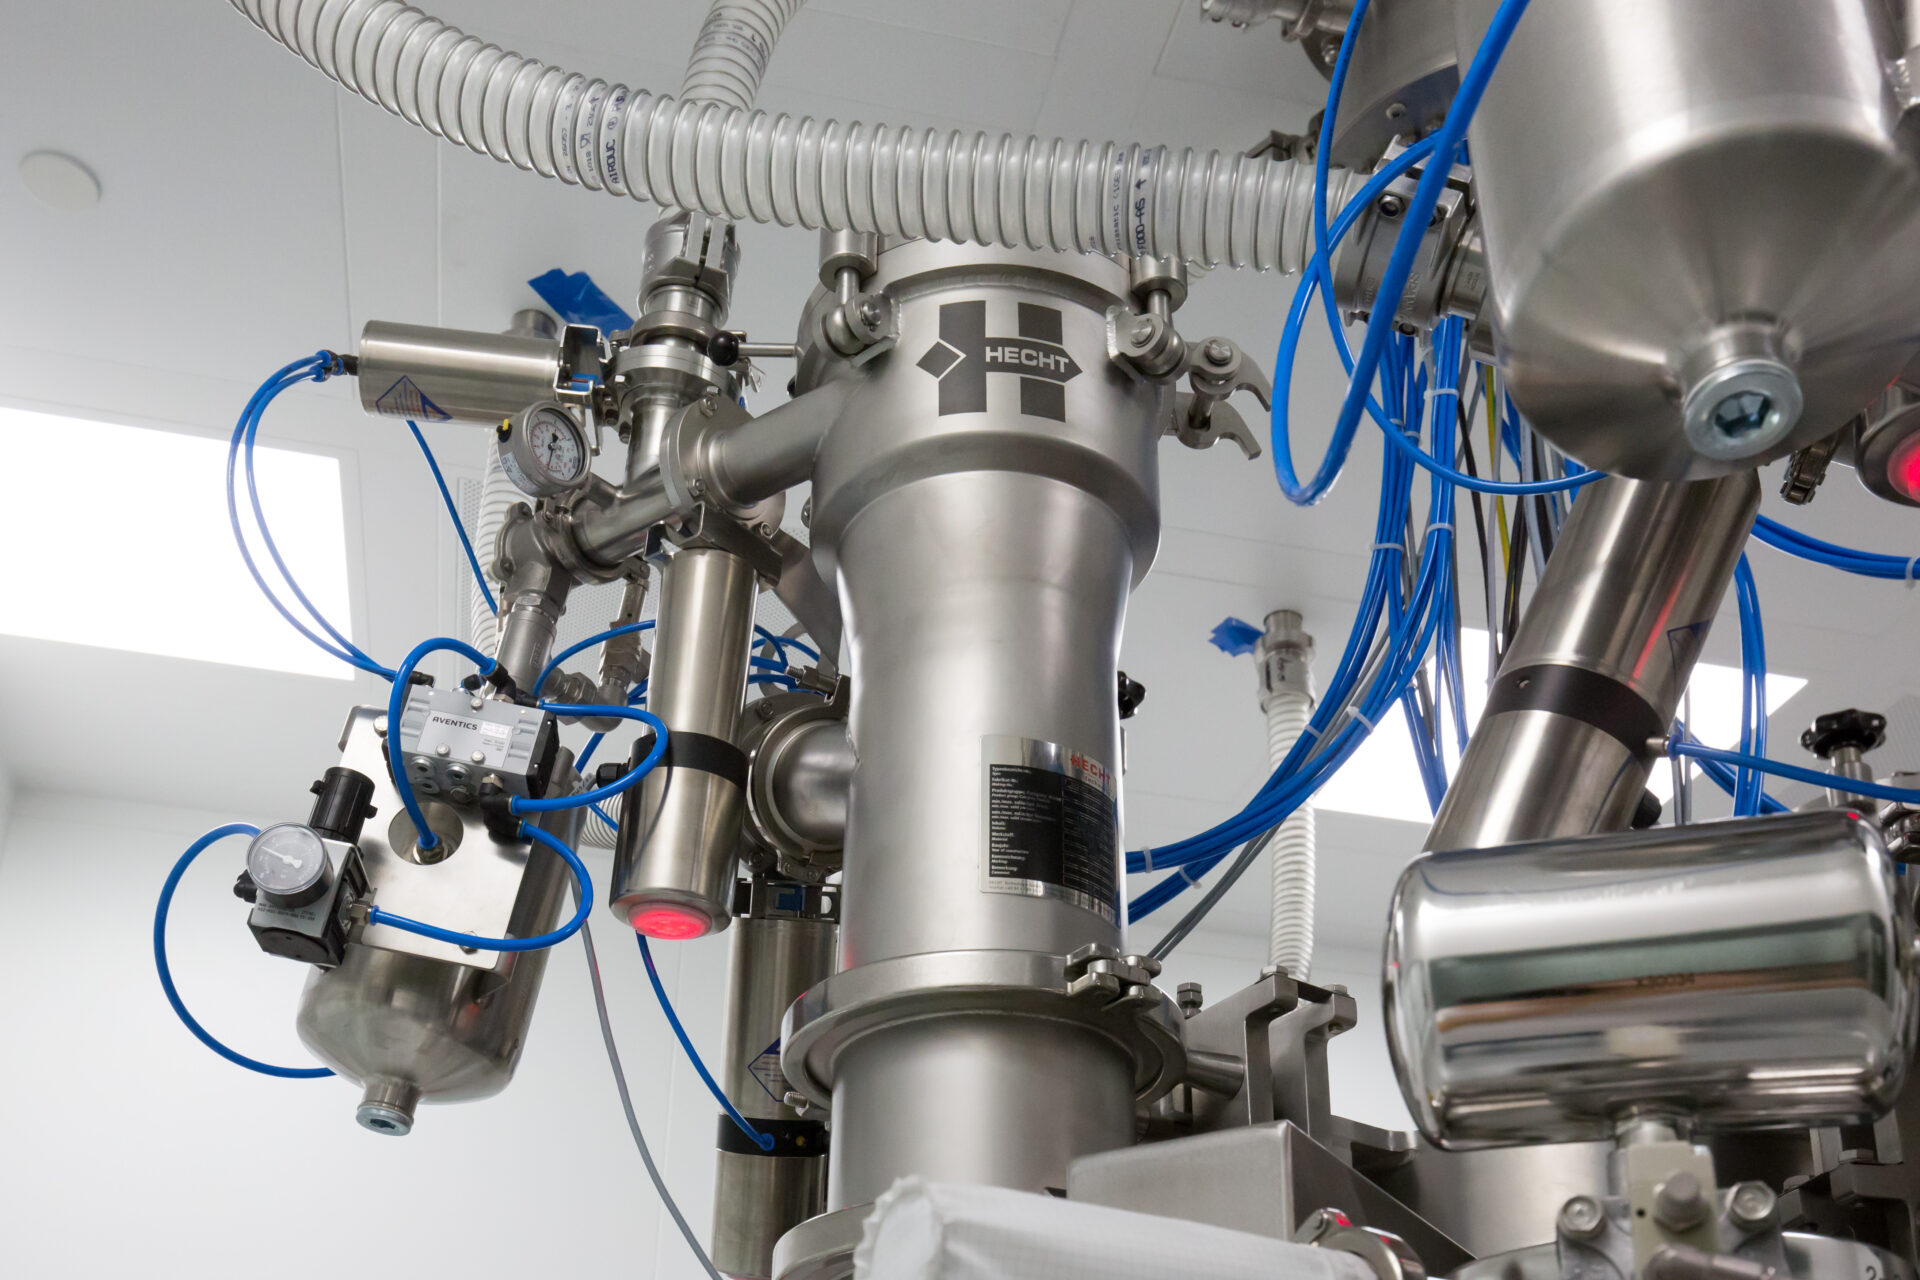 Complex HECHT ProClean Conveyor machinery at Pfizer Germany, featuring stainless steel components, tubing, pressure gauges, and flexible conduits. The system's intricate design and precise instrumentation are set against a clean, white ceiling with industrial lighting.